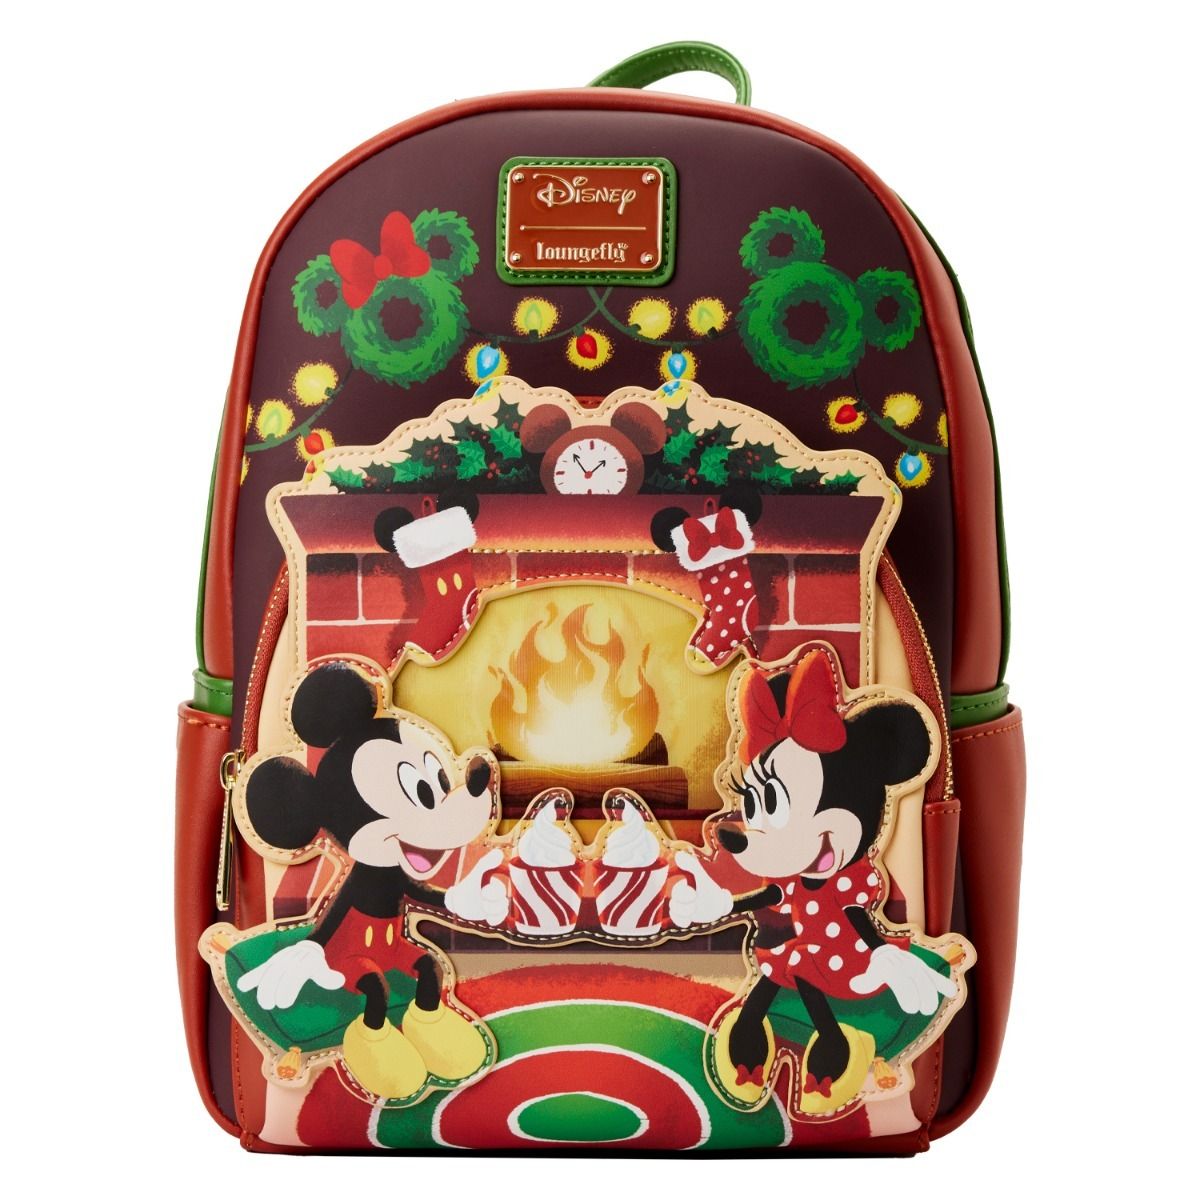 Buy Your Disney Mickey & Minnie Mouse Loungefly Backpack (Free Shipping) - Merchoid